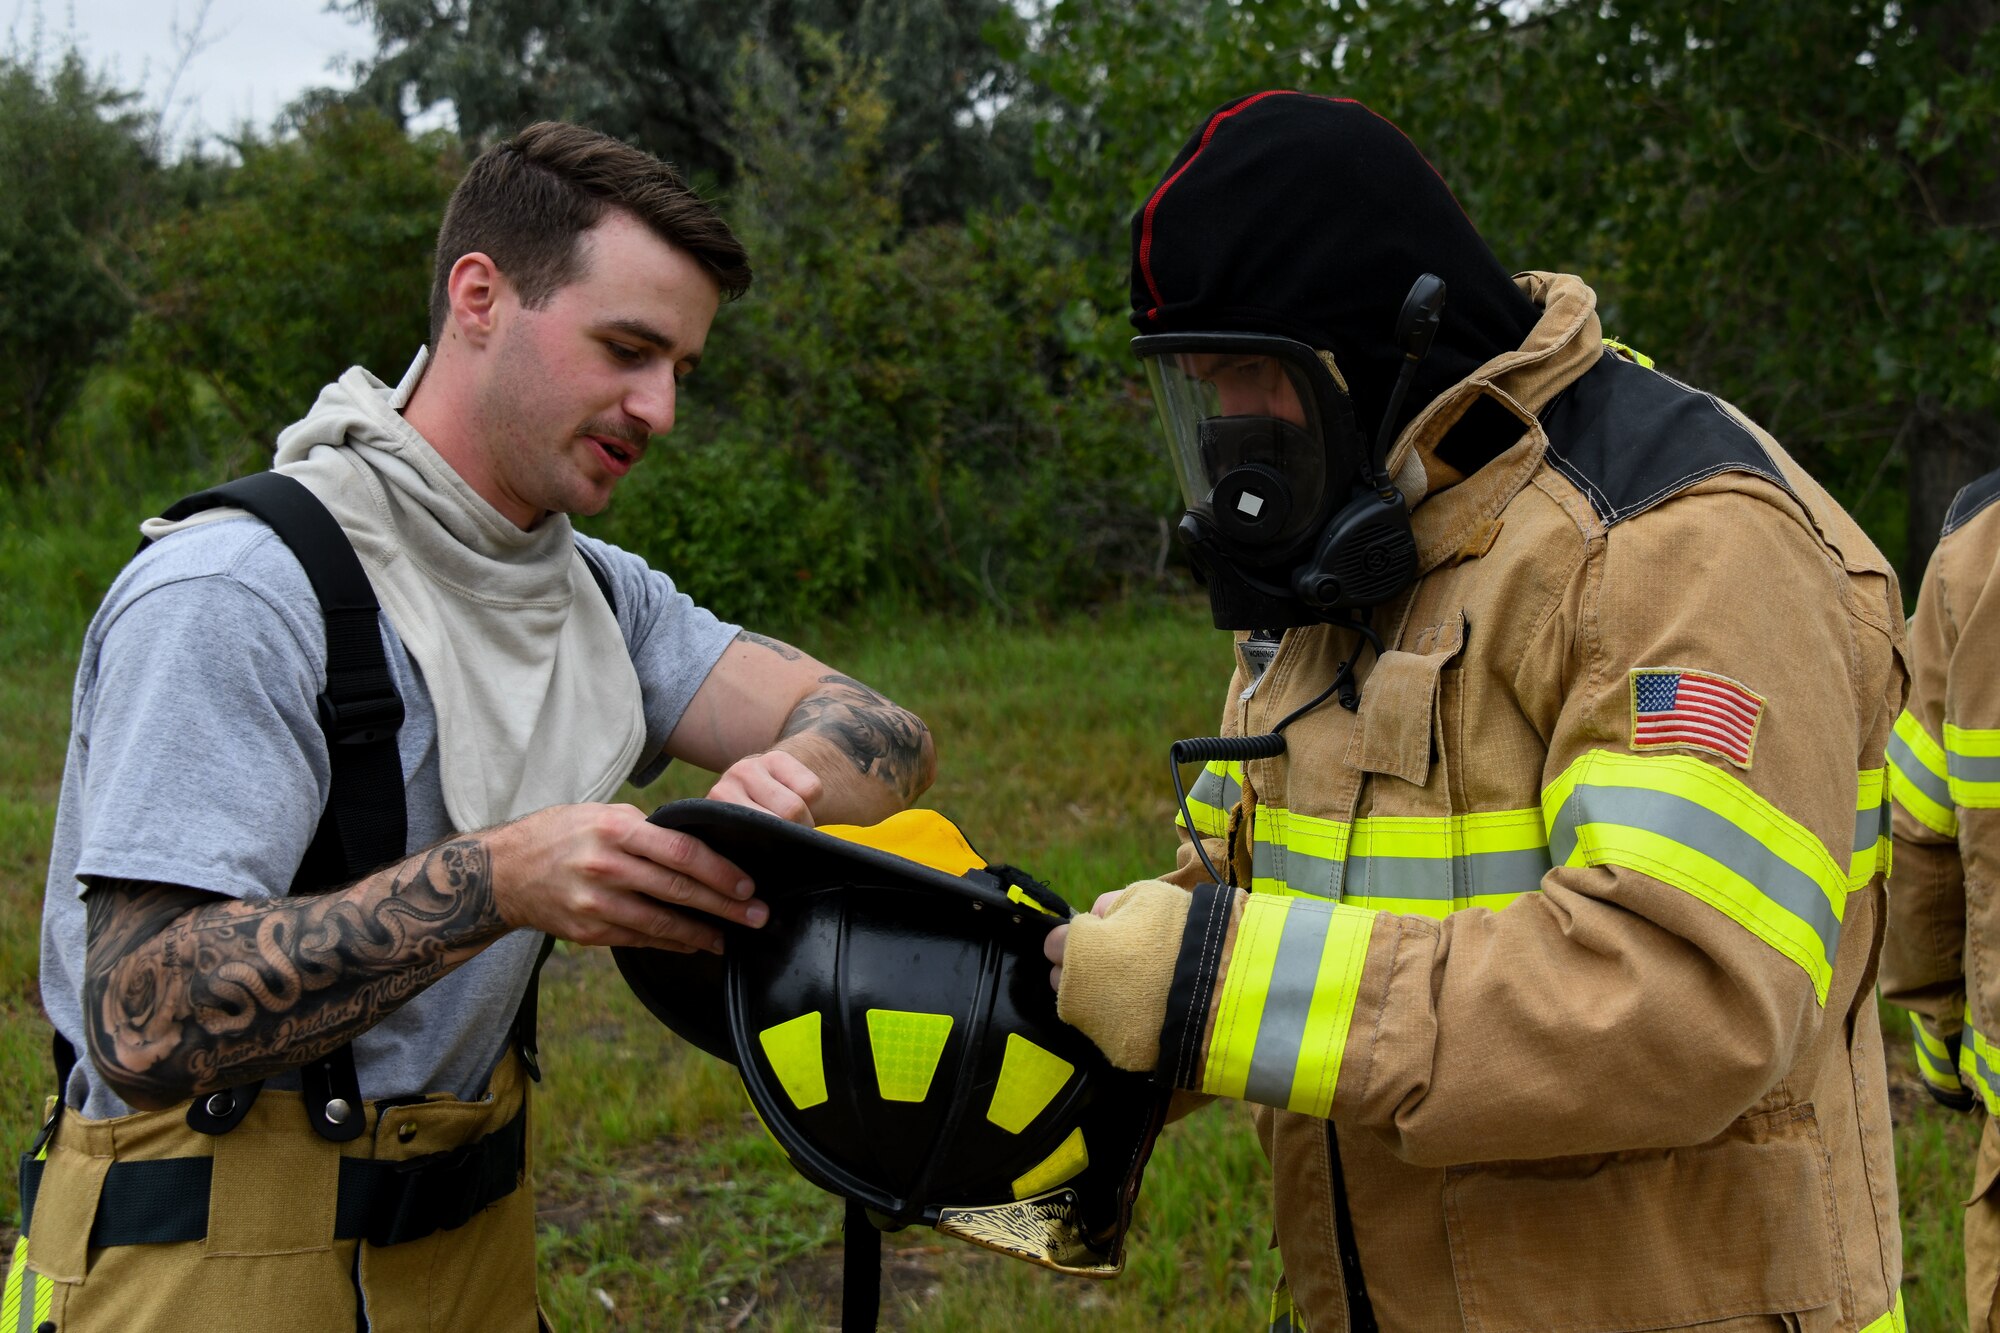 A man helps another man put on firefighter gear.